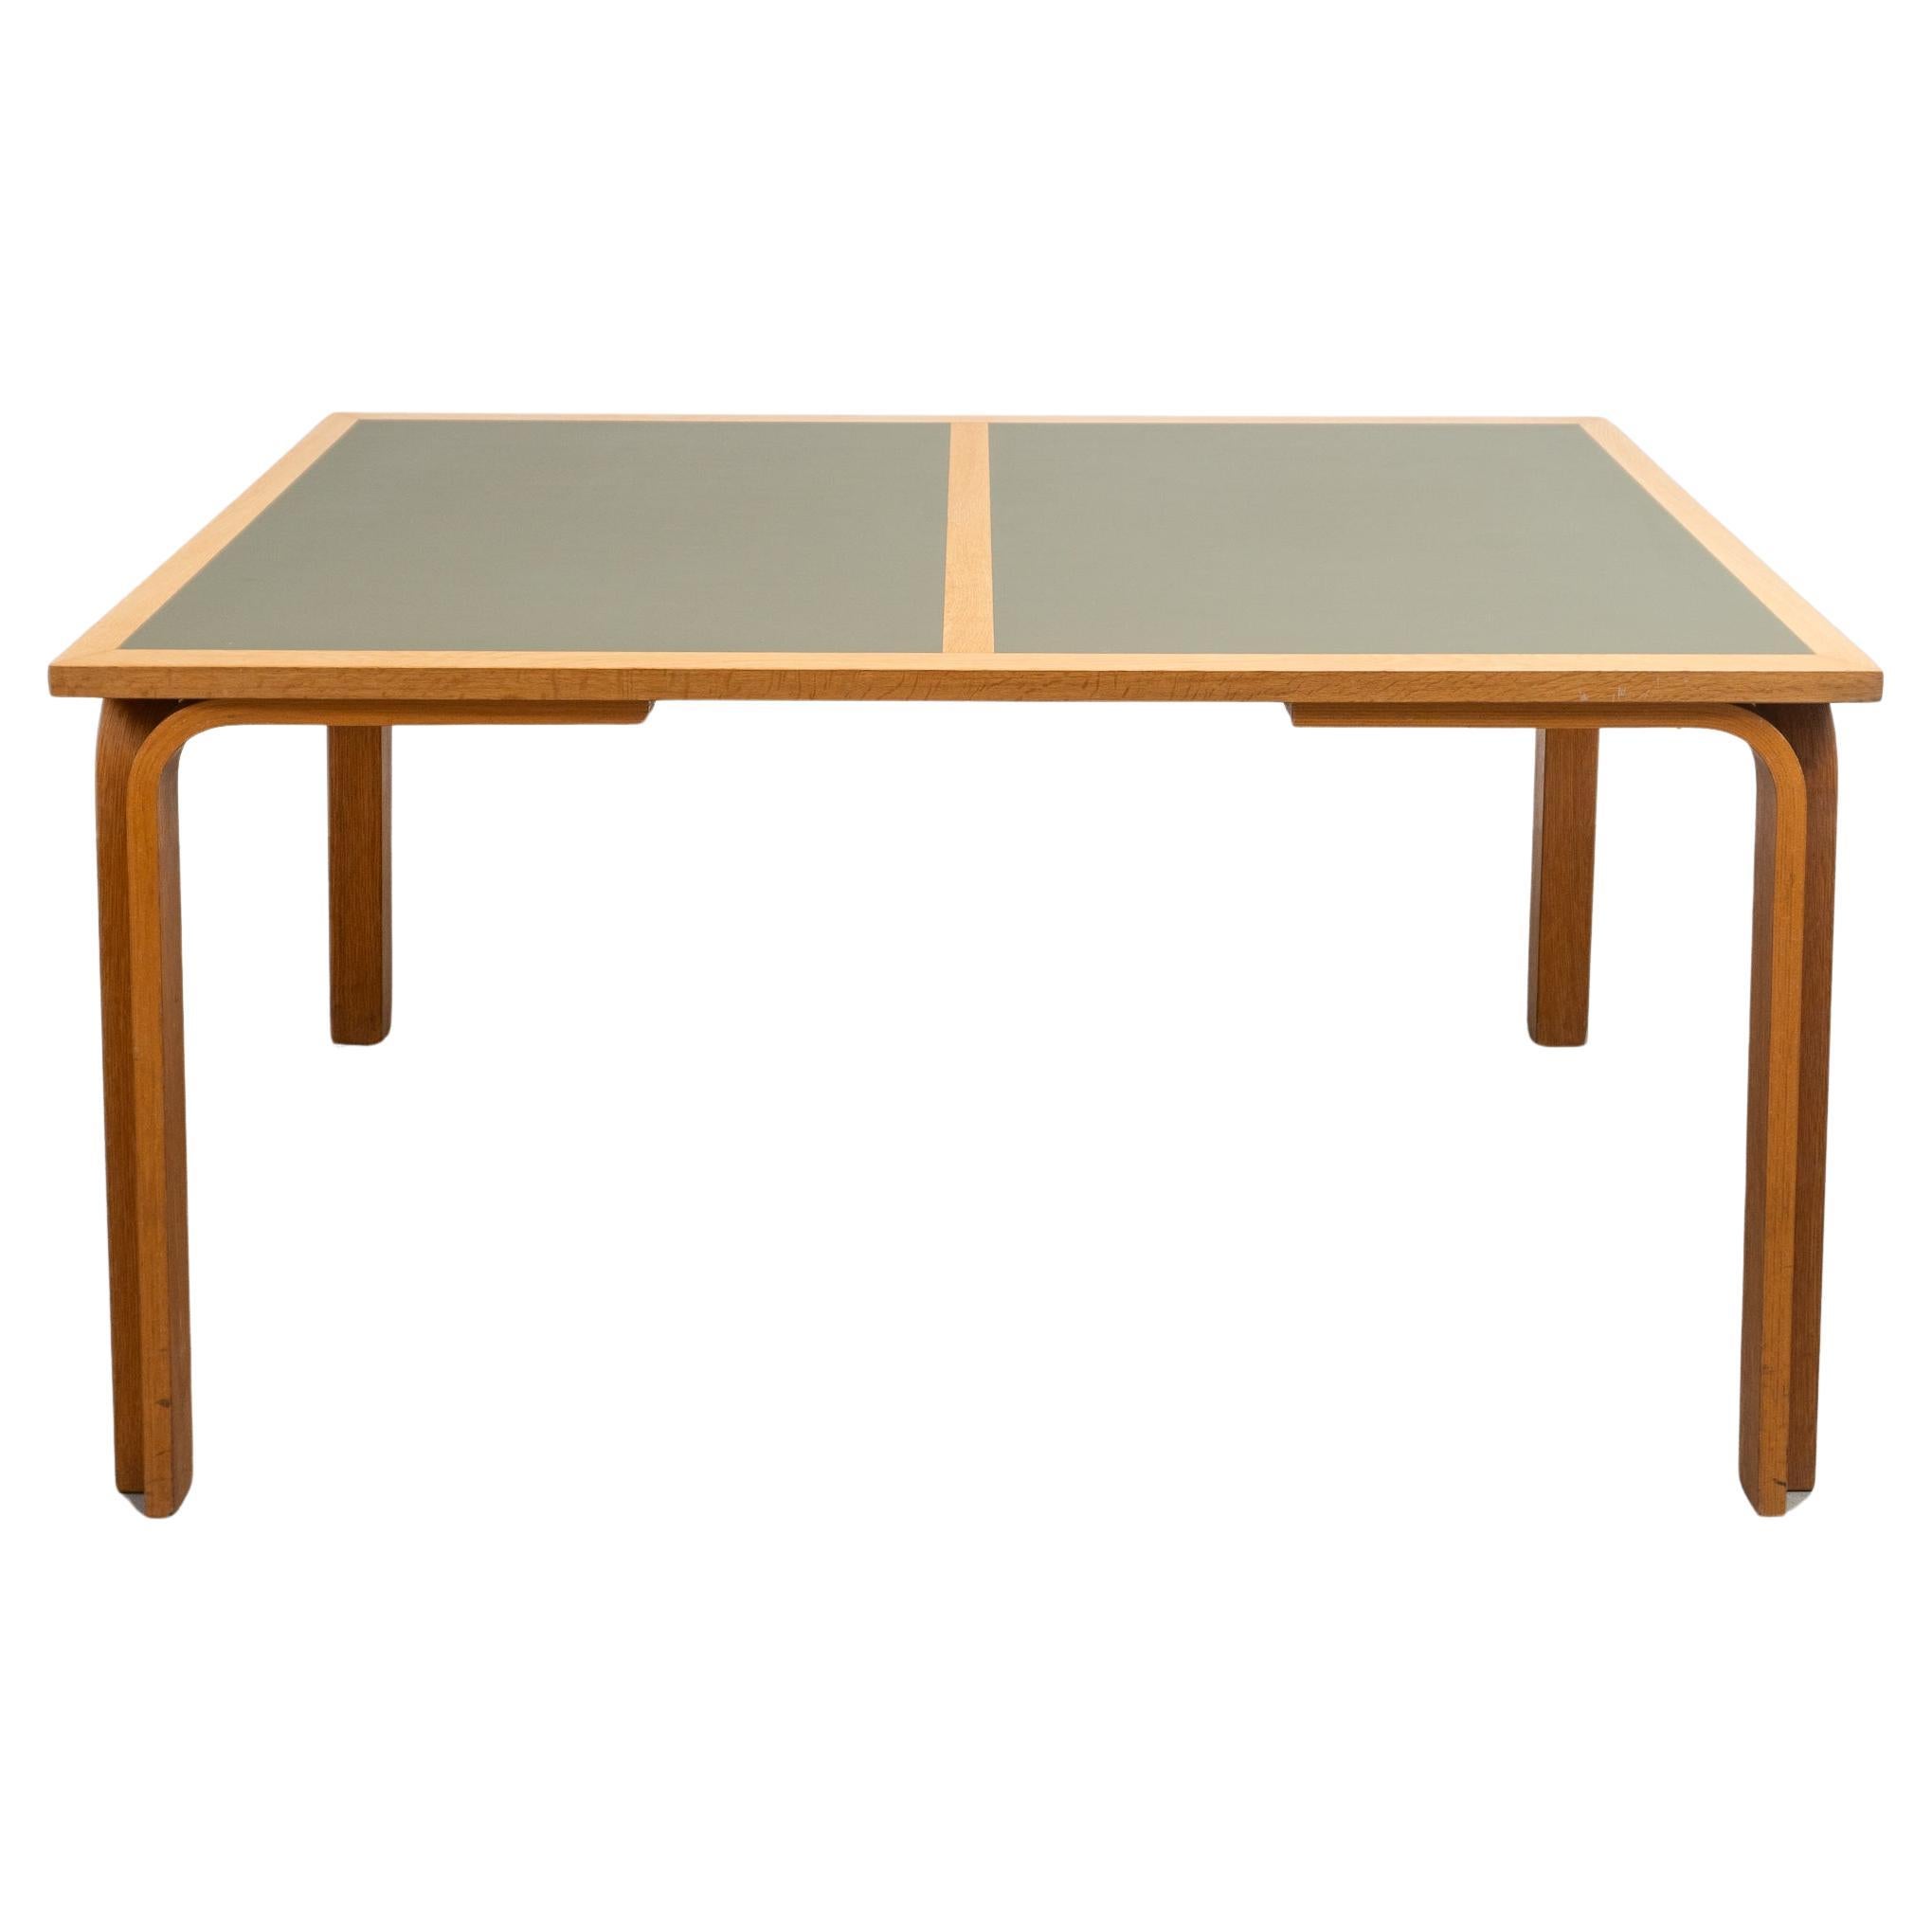 Magnus Olesen Labeled Made in Denmark Green Olive Table Top, 1970s